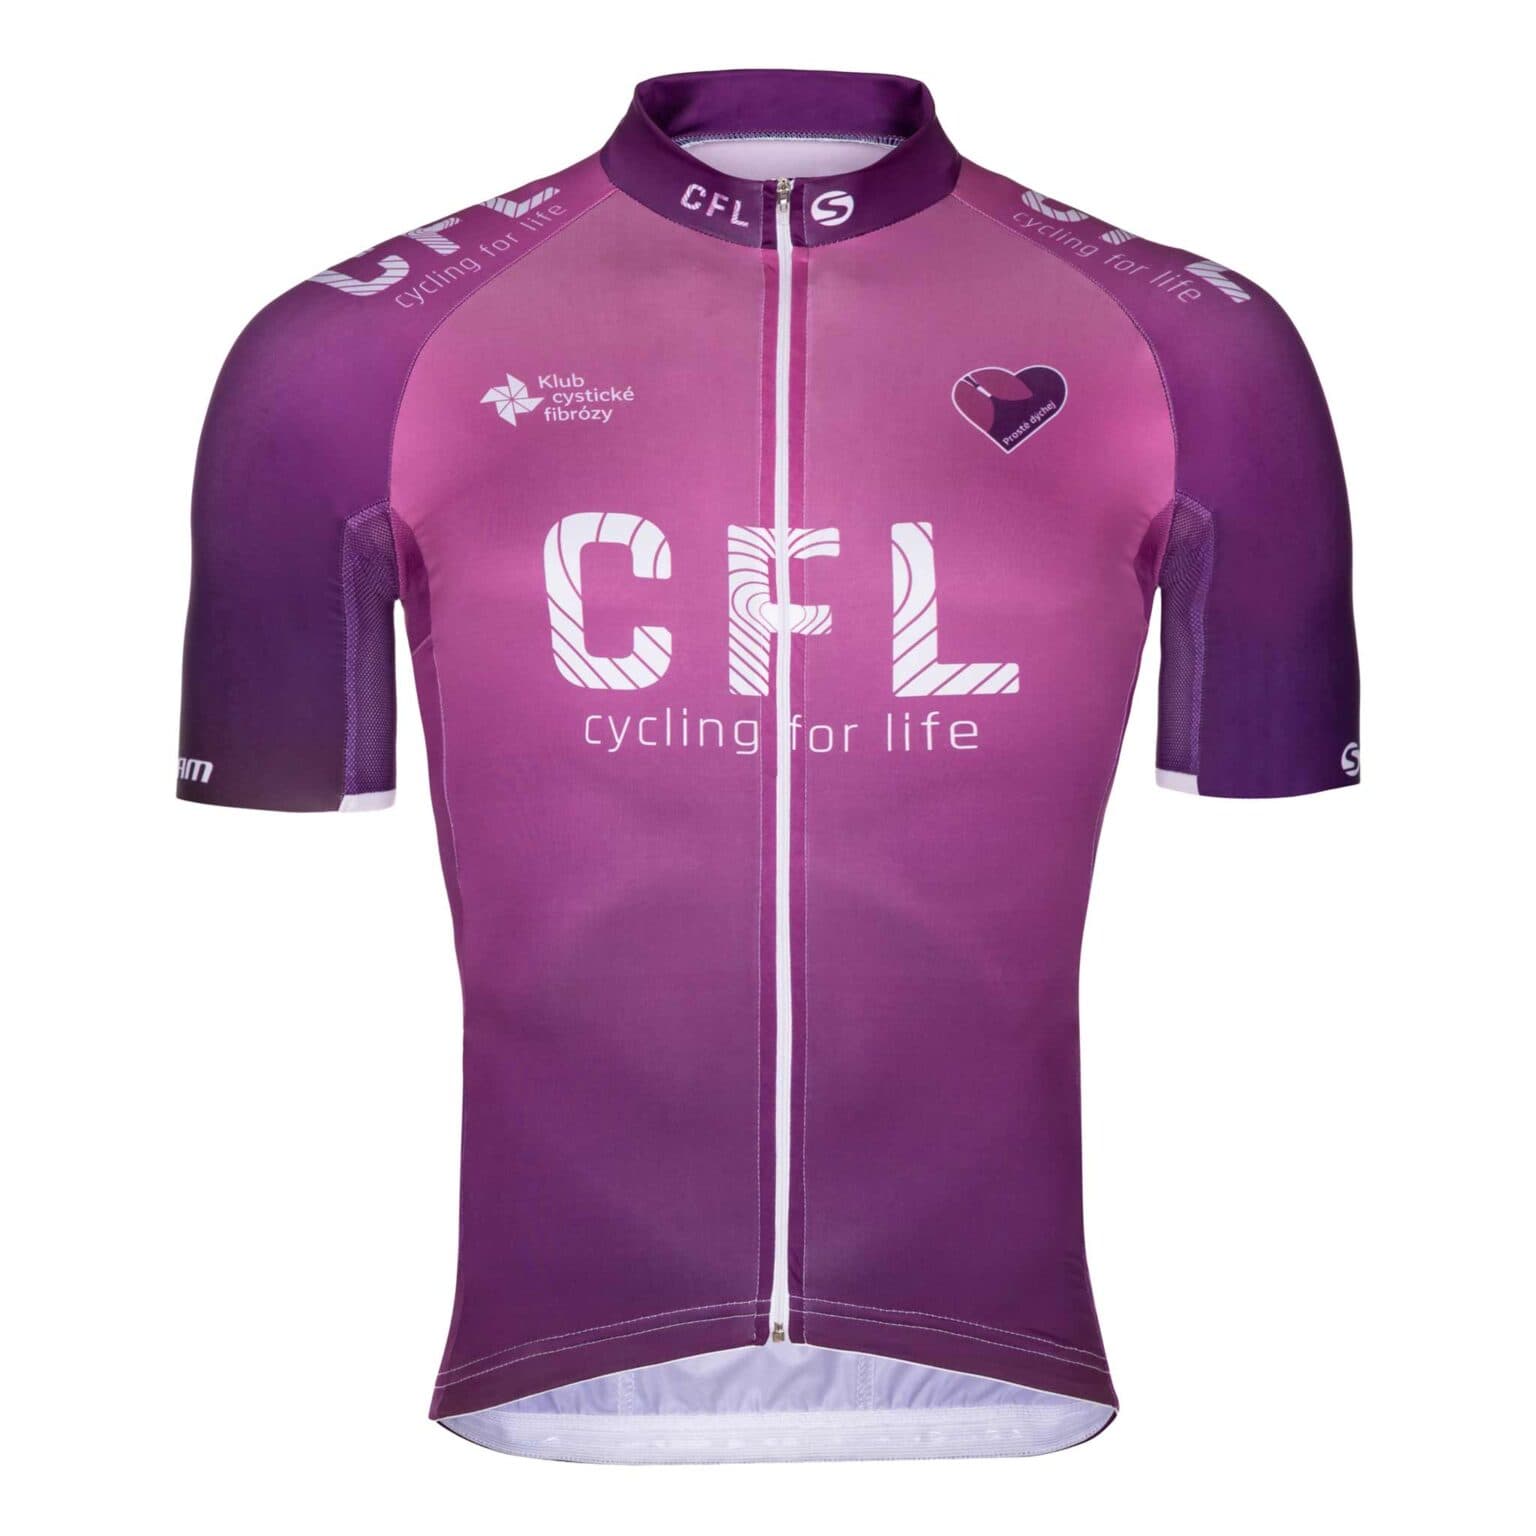 Cycling for life dres